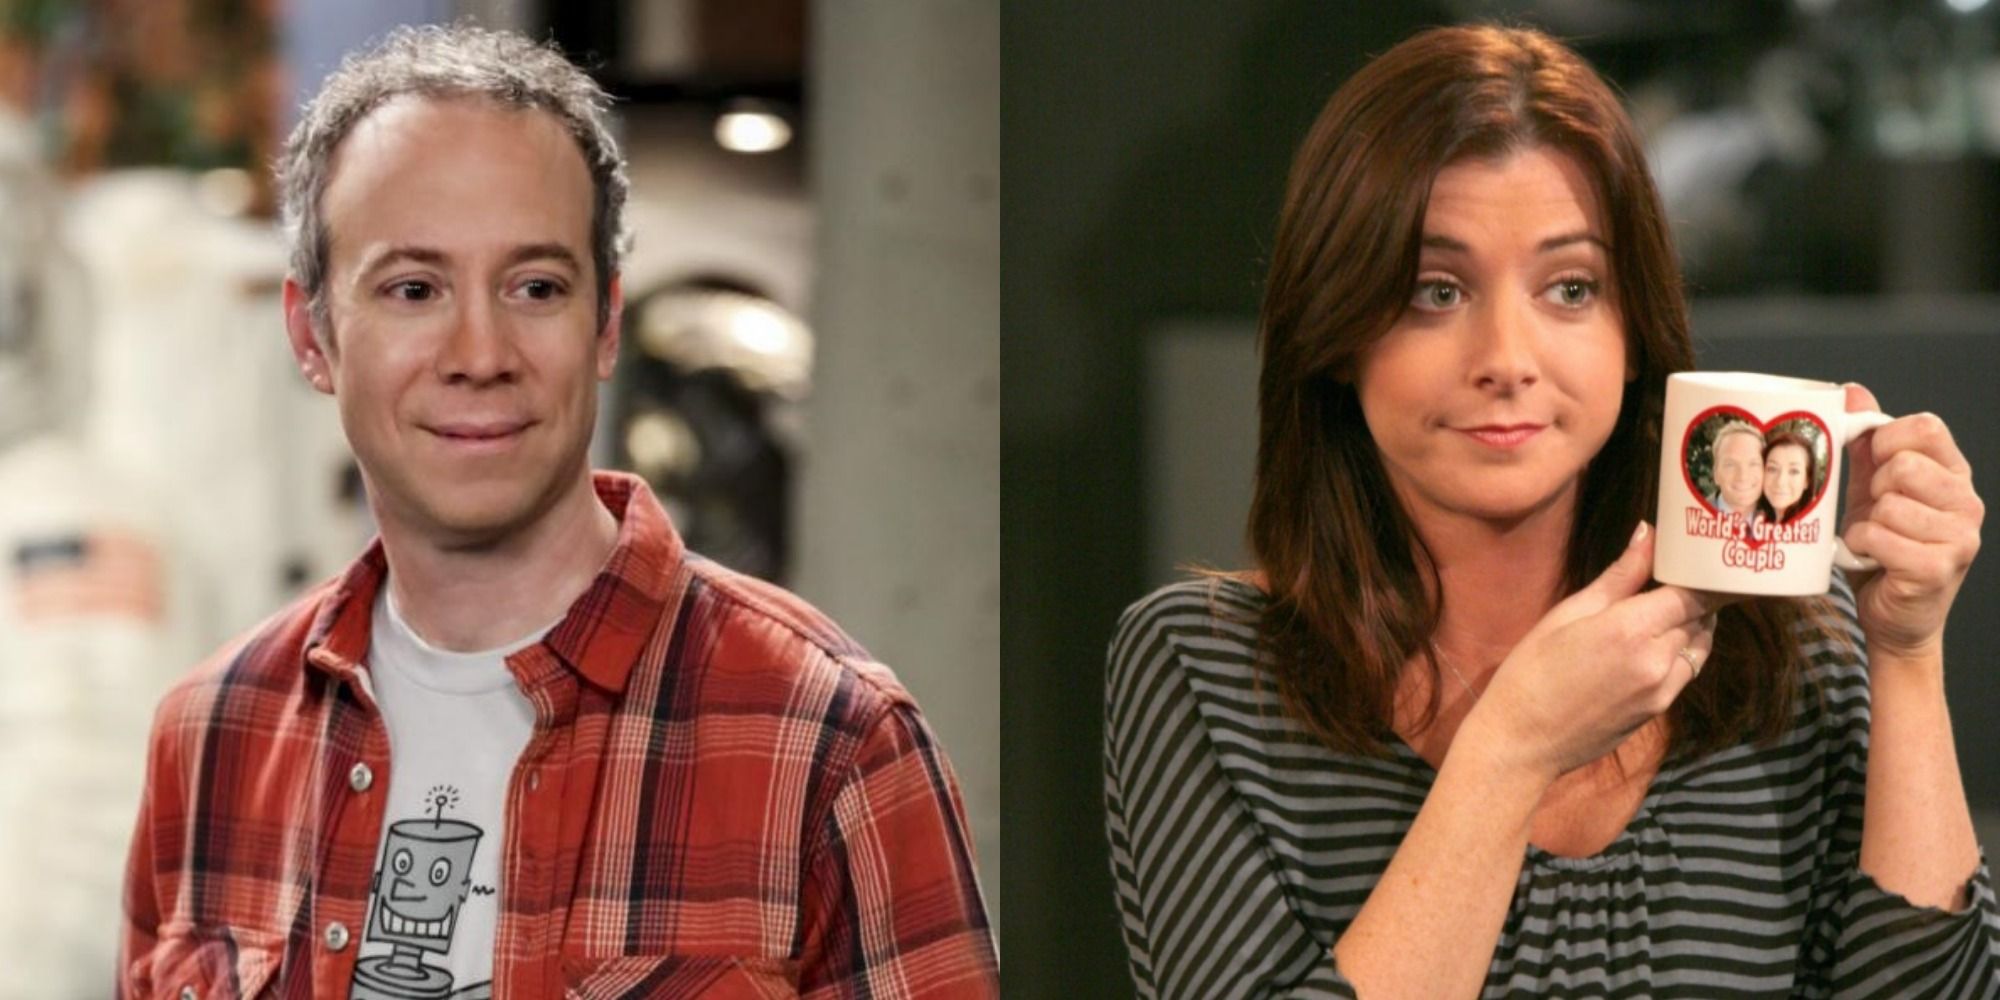 A split-screen image showing The Big Bang Theory's Stuart Bloom and How I Met Your Mother's Lily Aldrin